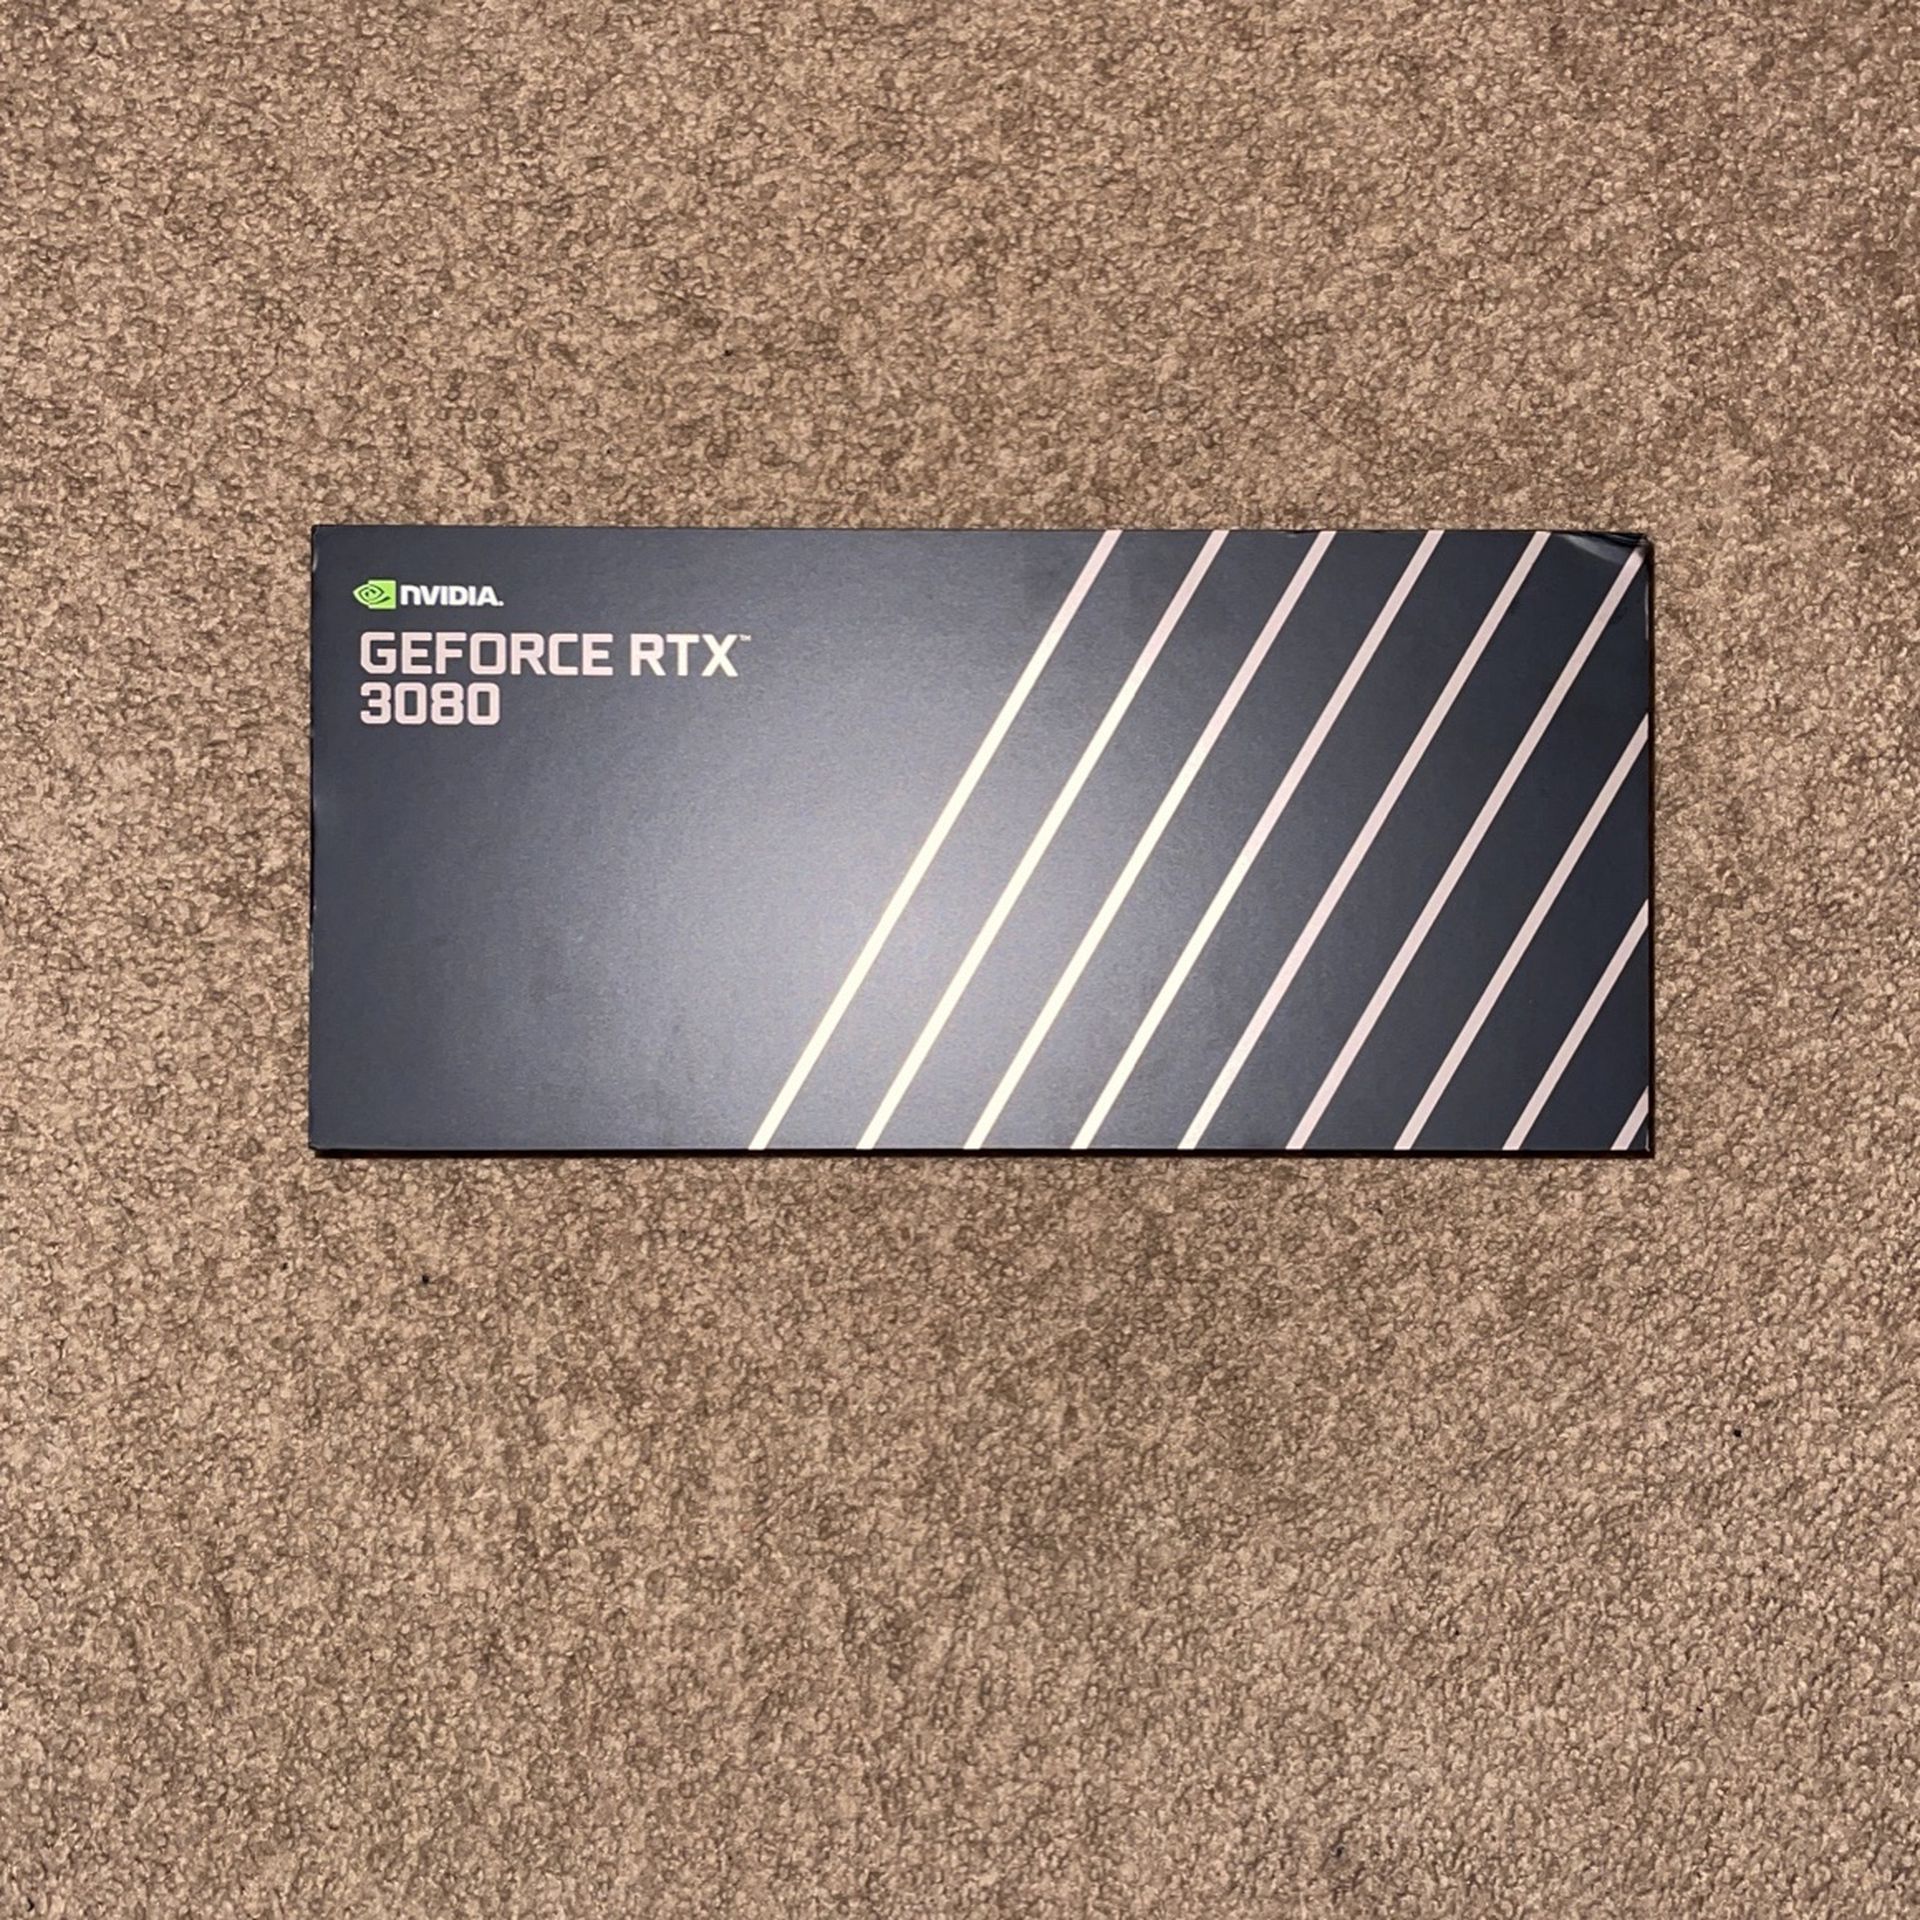 NVIDIA GeForce RTX 3080 10GB GDDR6X PCI Express 4.0 Graphics Card - Titanium and Black Founders Edition